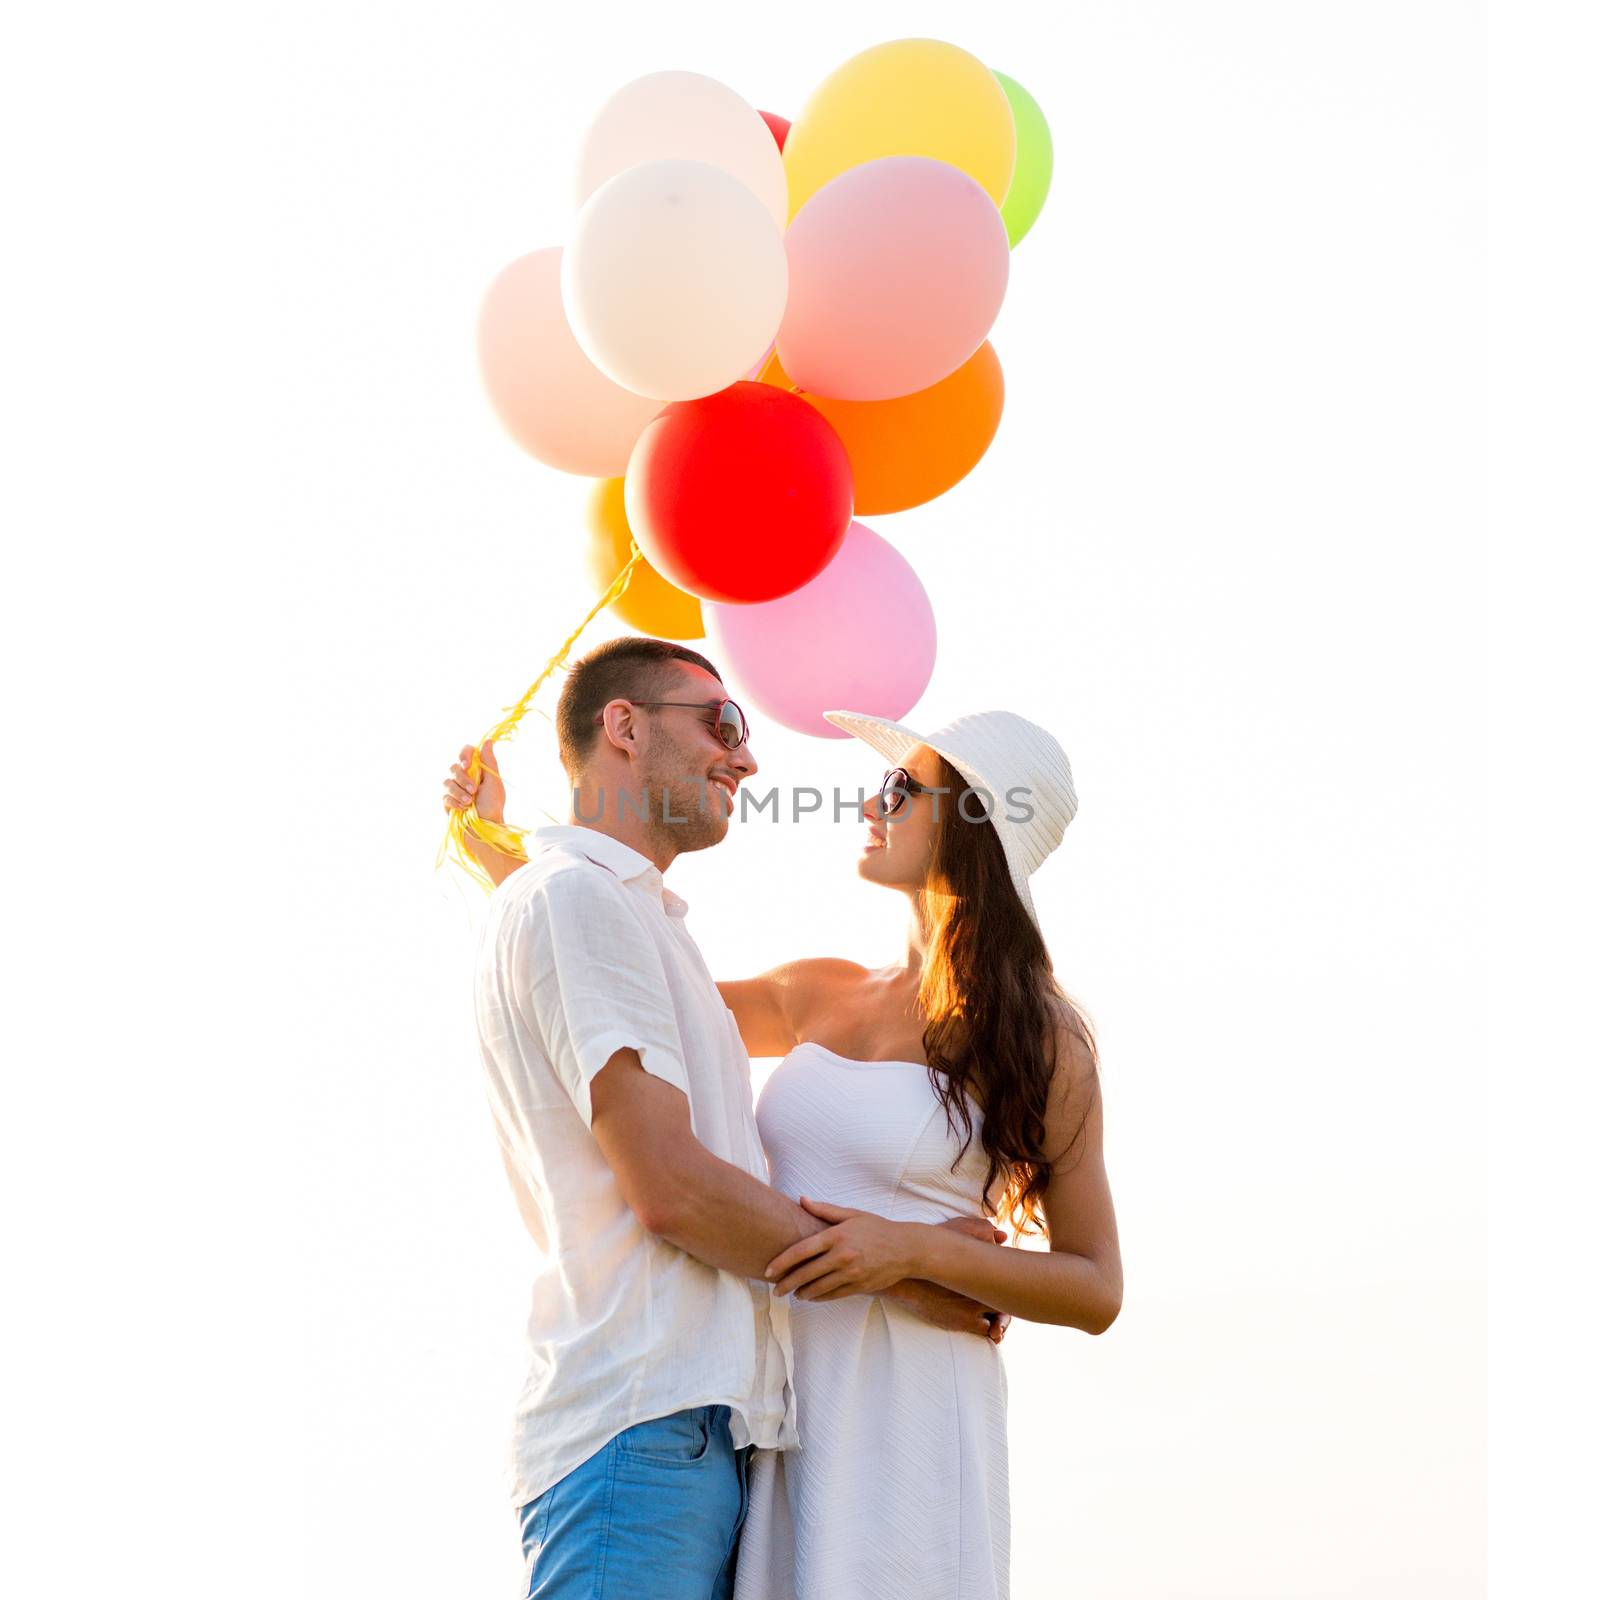 love, wedding, summer, dating and people concept - smiling couple wearing sunglasses with balloons hugging outdoors